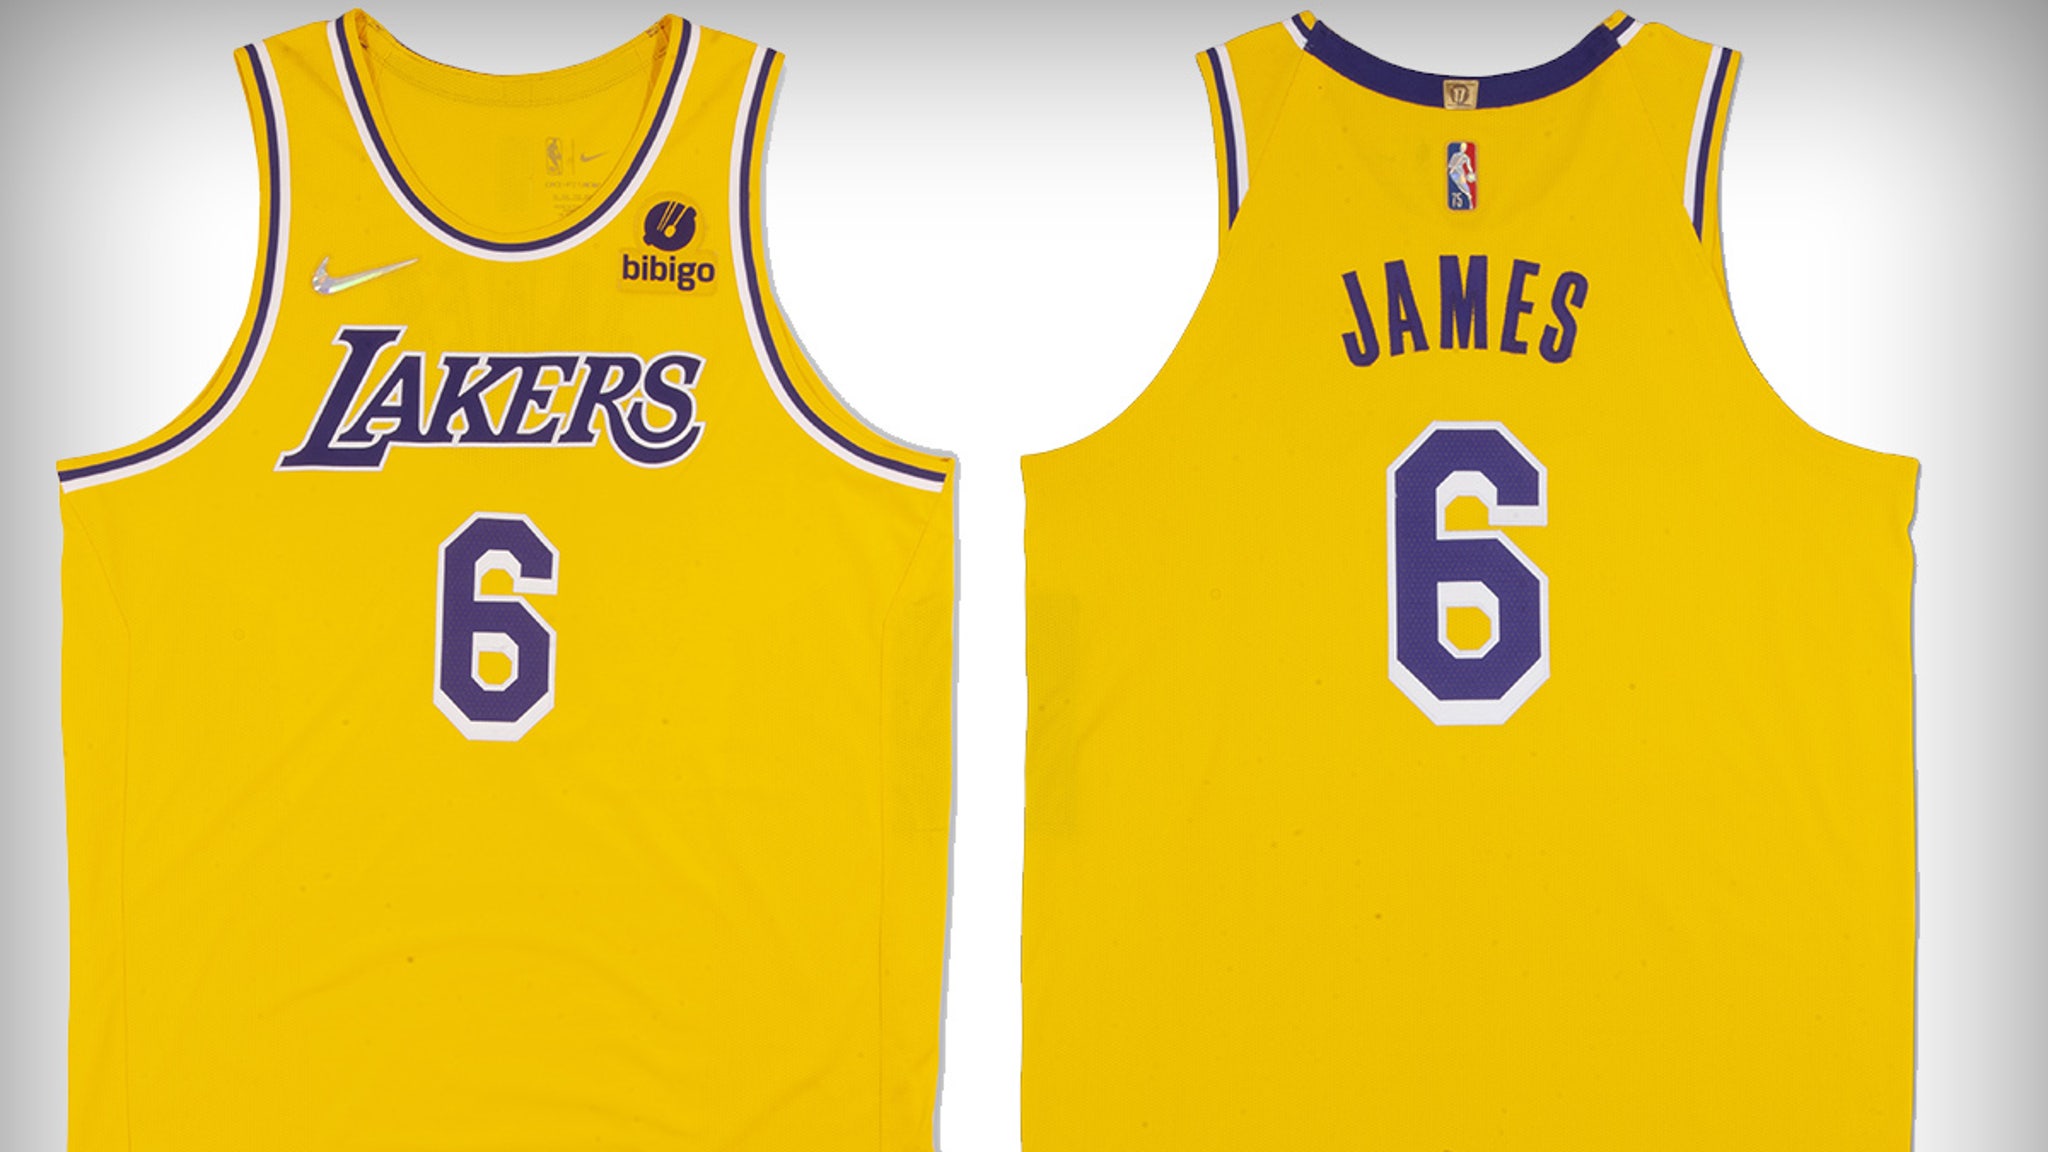 where can i buy a lakers jersey near me